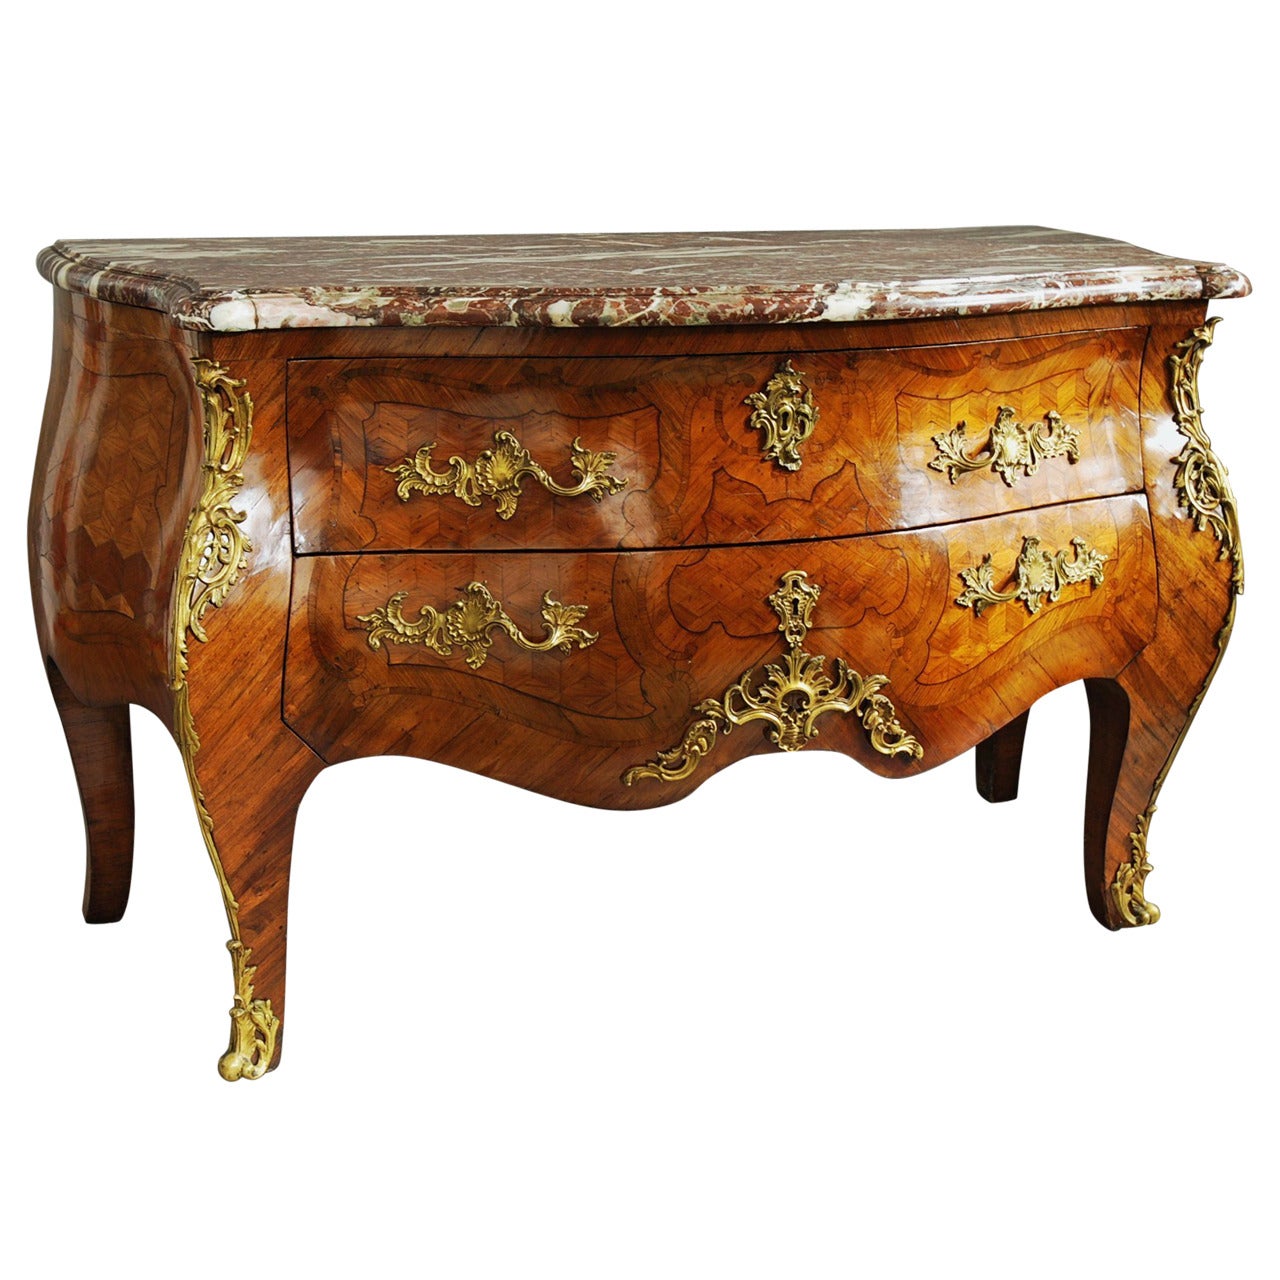 Rare 18th Century French Kingwood Commode For Sale